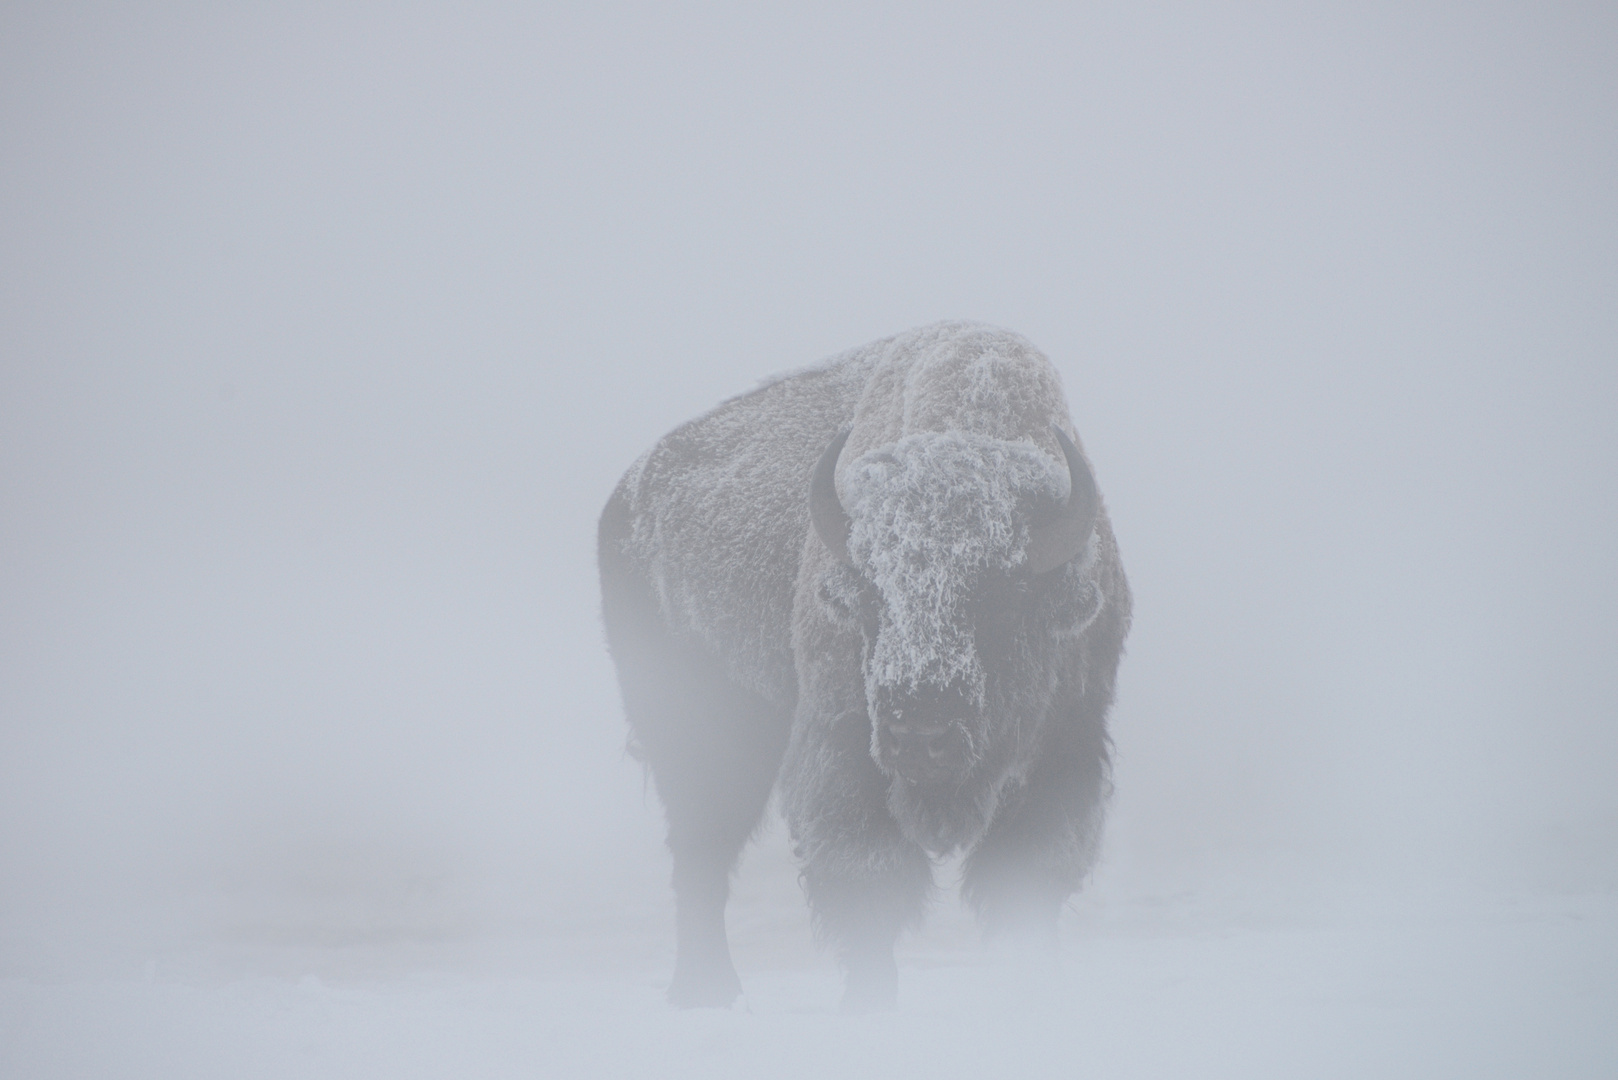 Icy Bison